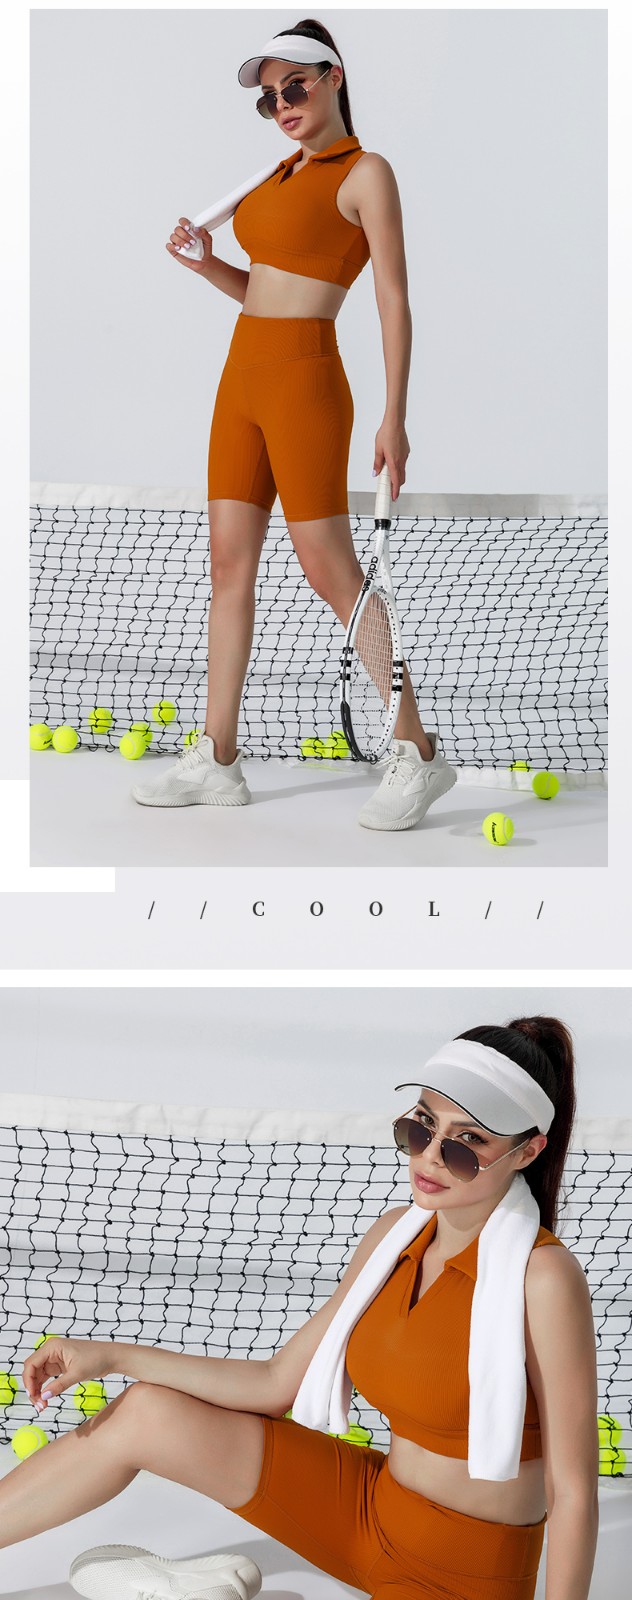 INGOR soft women's tennis outfits owner for ladies-4